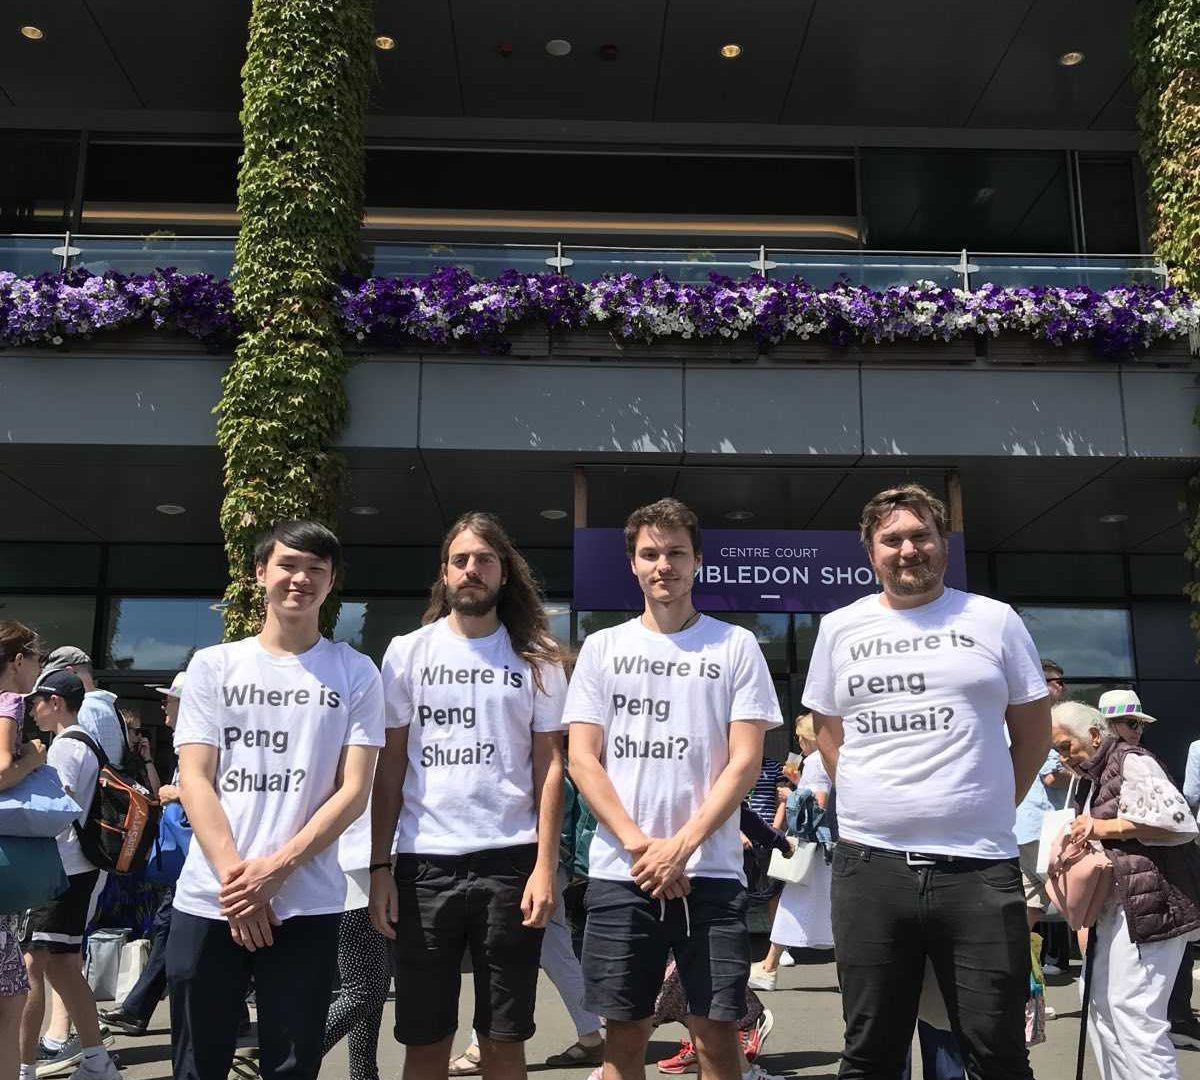 Free Tibet activists supporting Peng Shuai confronted by officials at Wimbledon